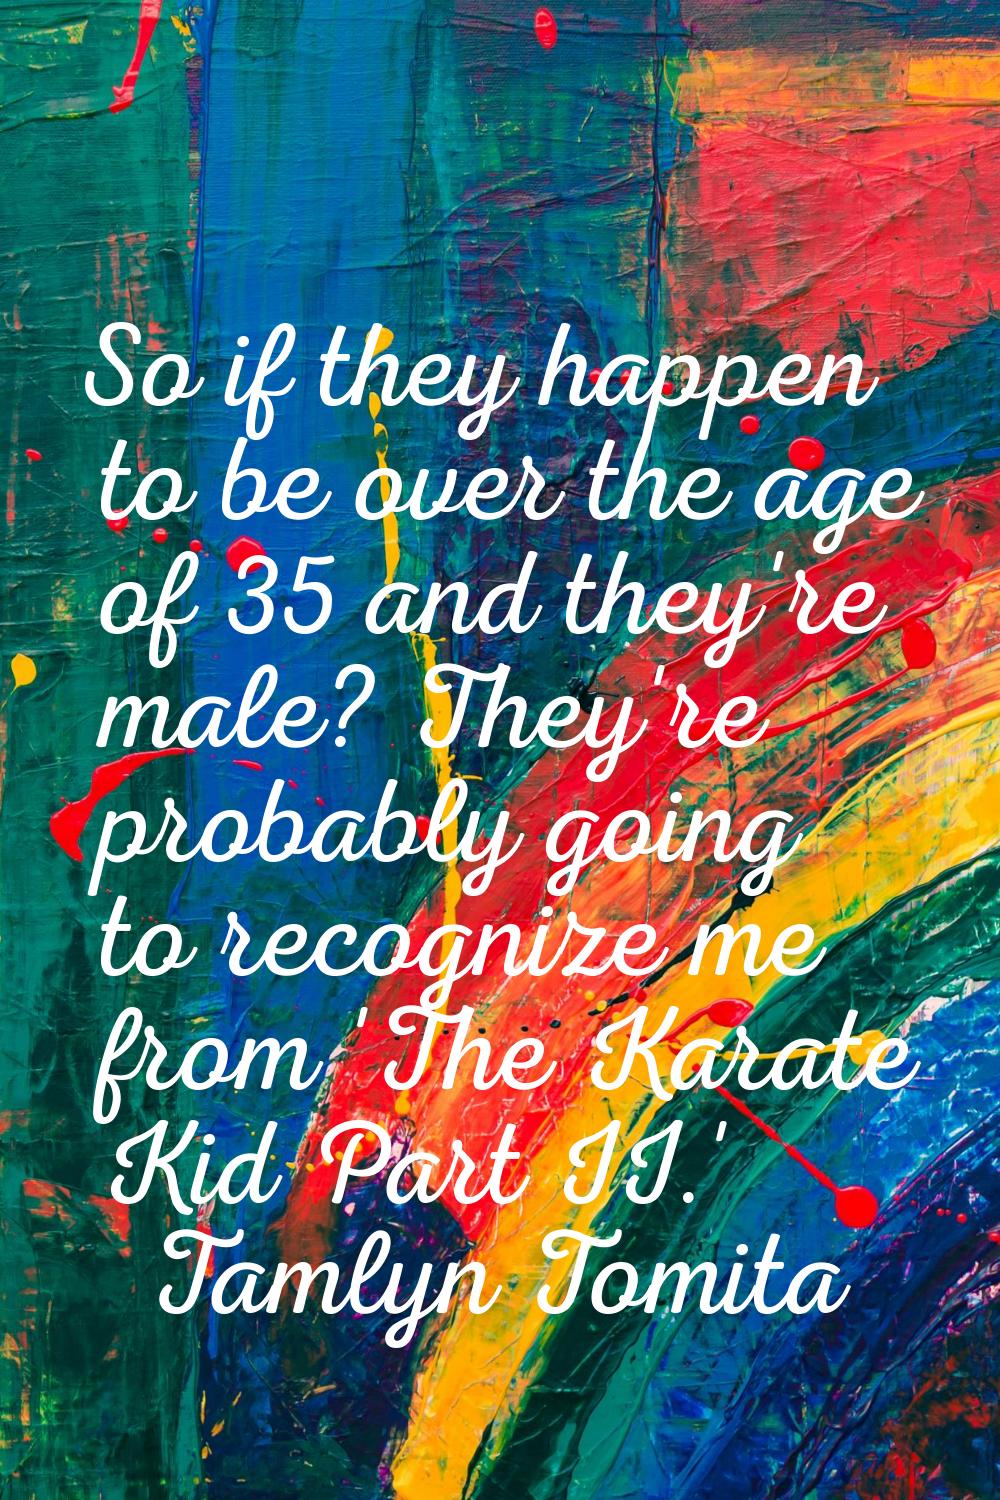 So if they happen to be over the age of 35 and they're male? They're probably going to recognize me